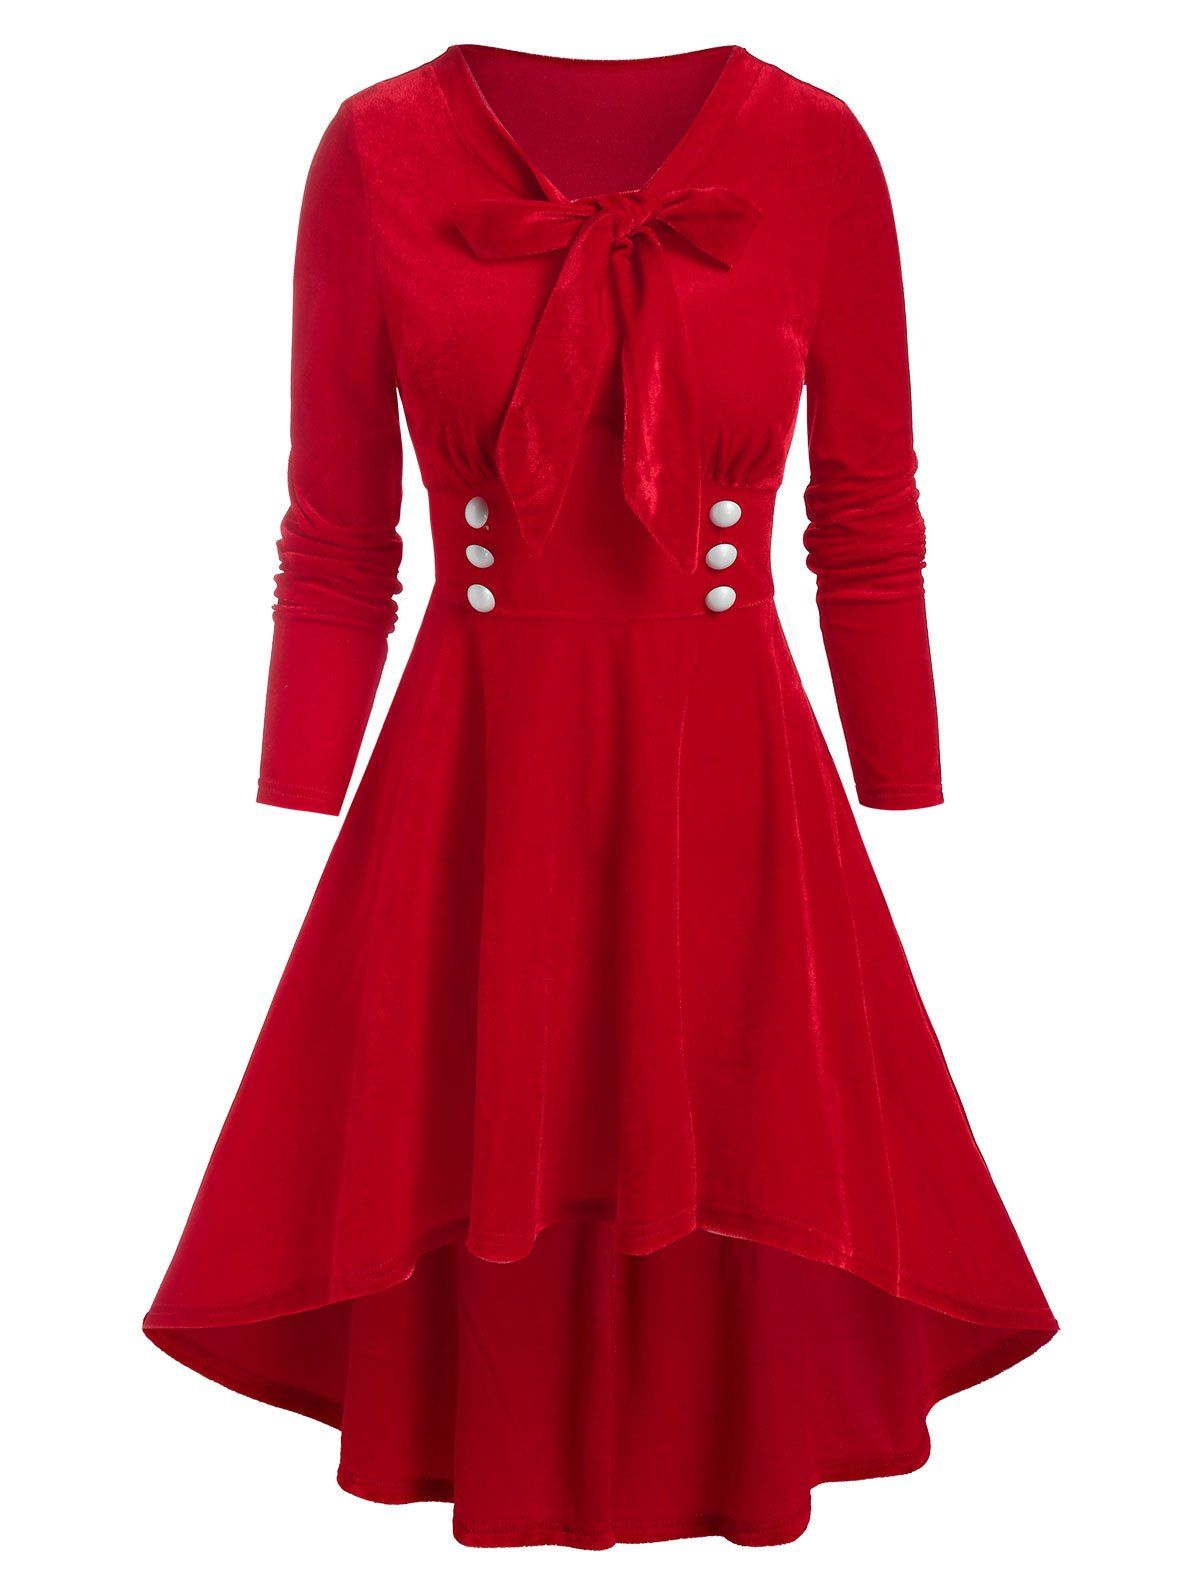 Tie Knot Mock Button High Low Velour Dress - RED M